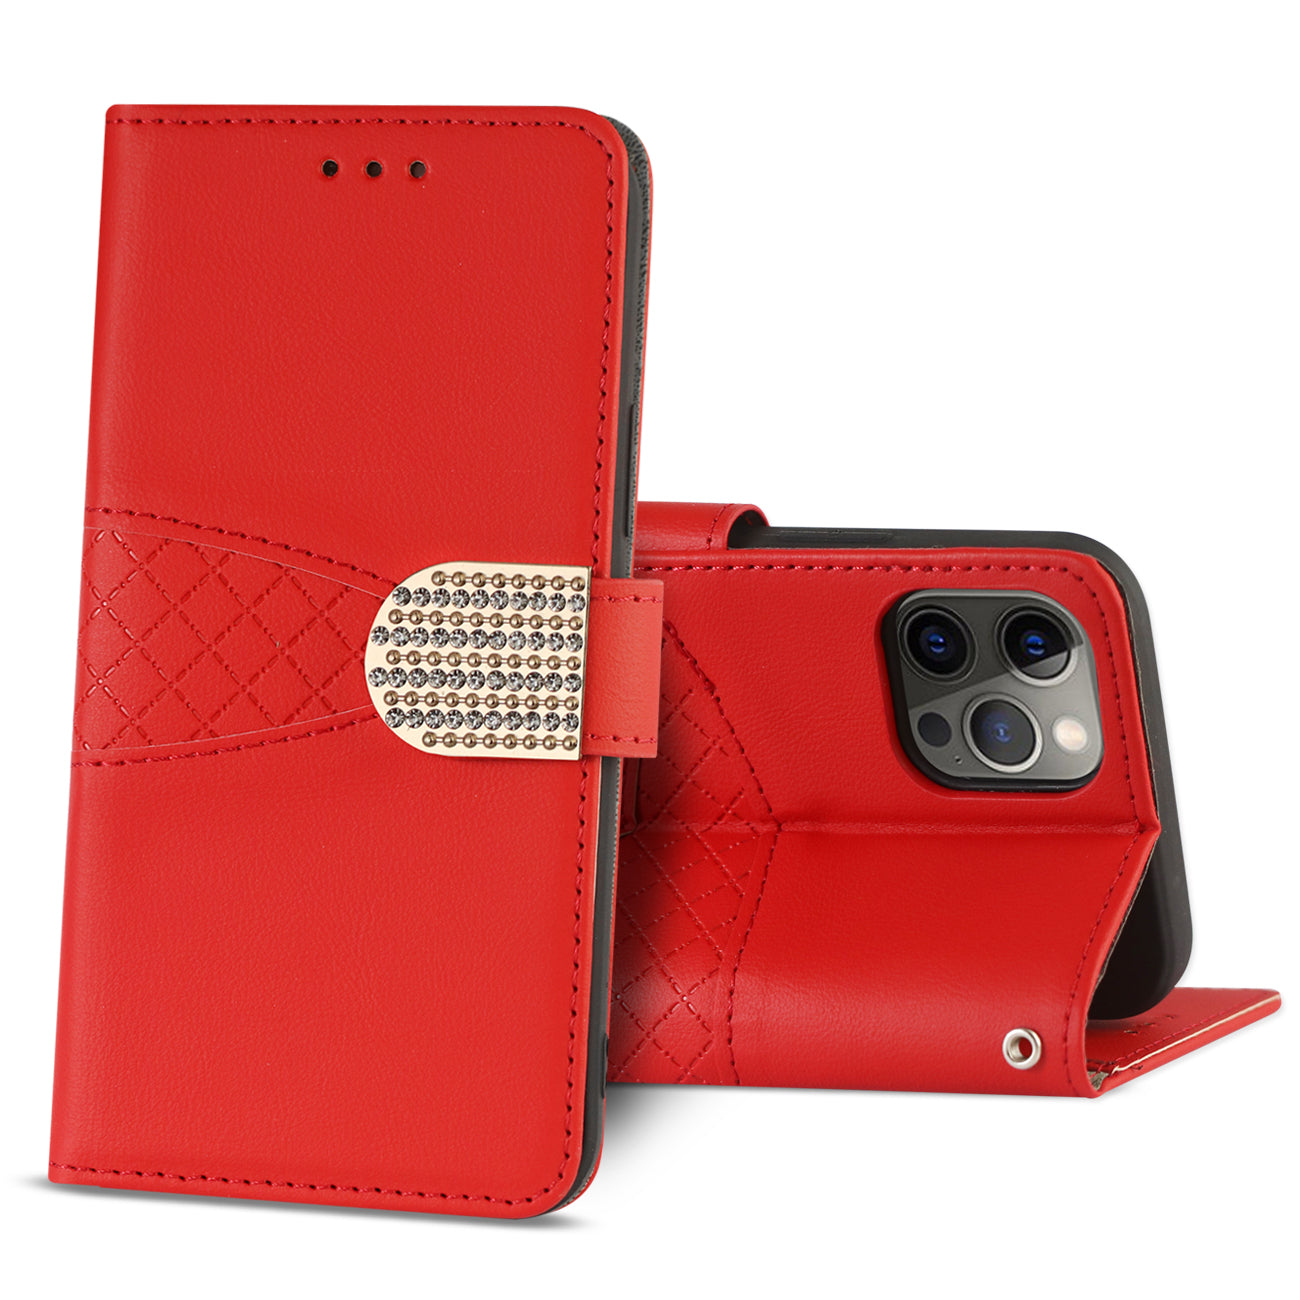 3-In-1 Wallet Case for IPHONE 12/IPHONE 12 PRO In Red